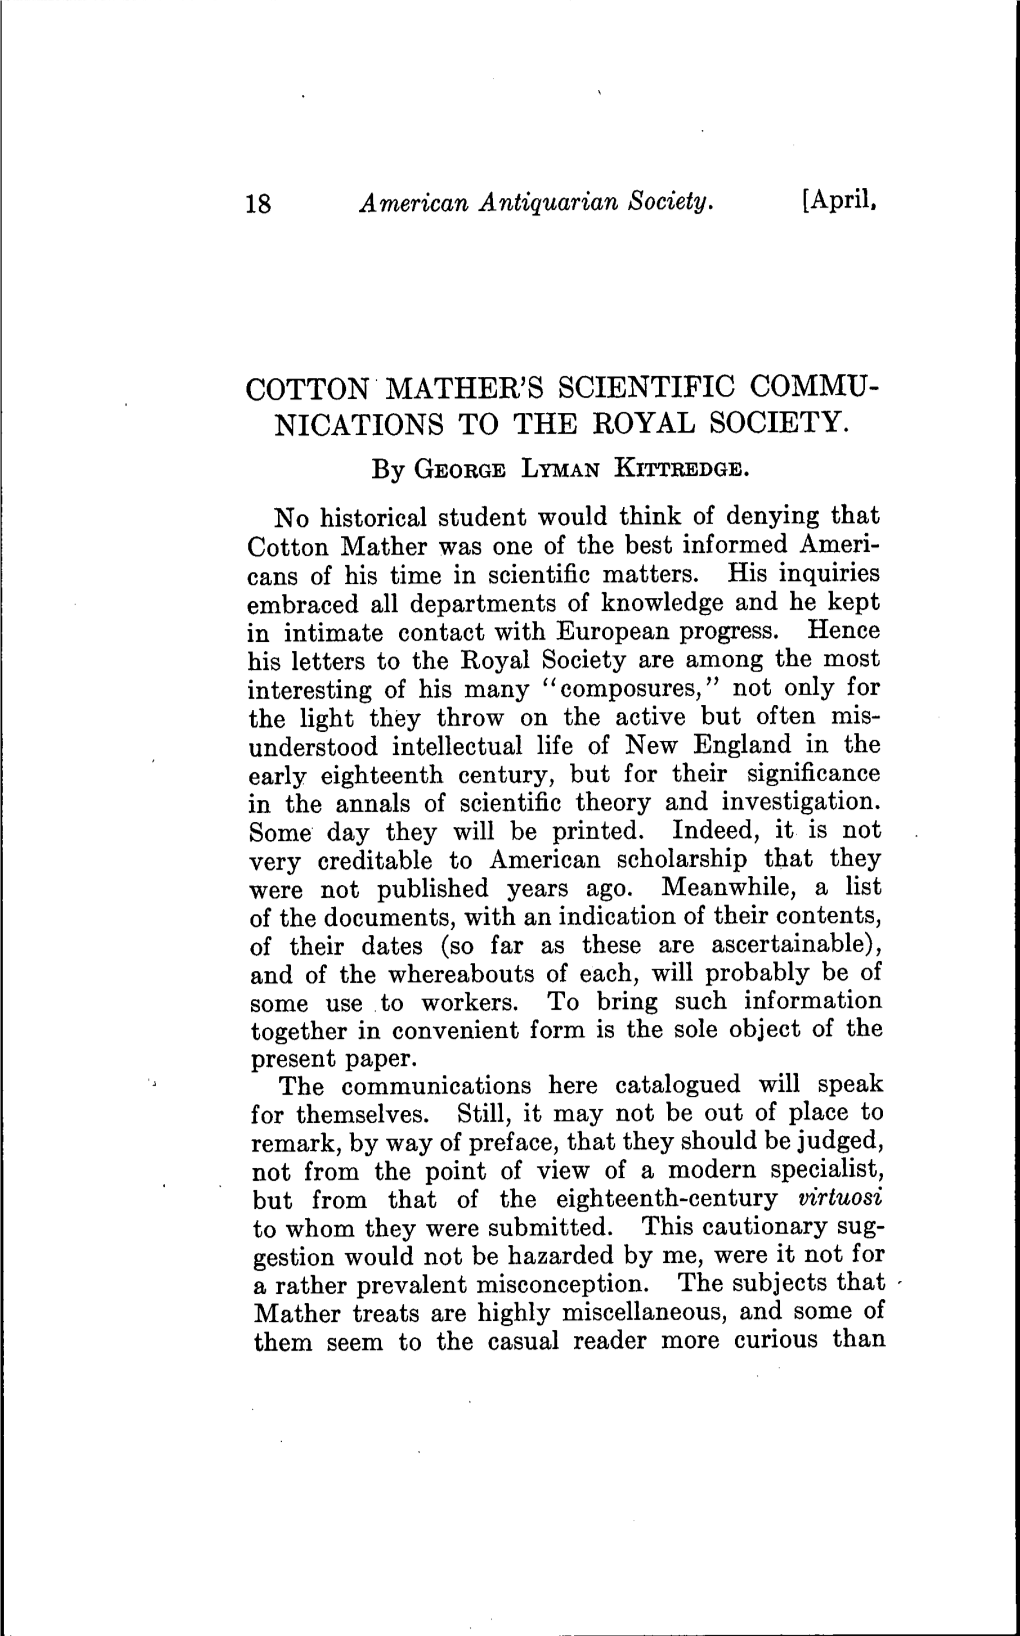 Cotton Mather's Scientific Commu- Nications to the Royal Society